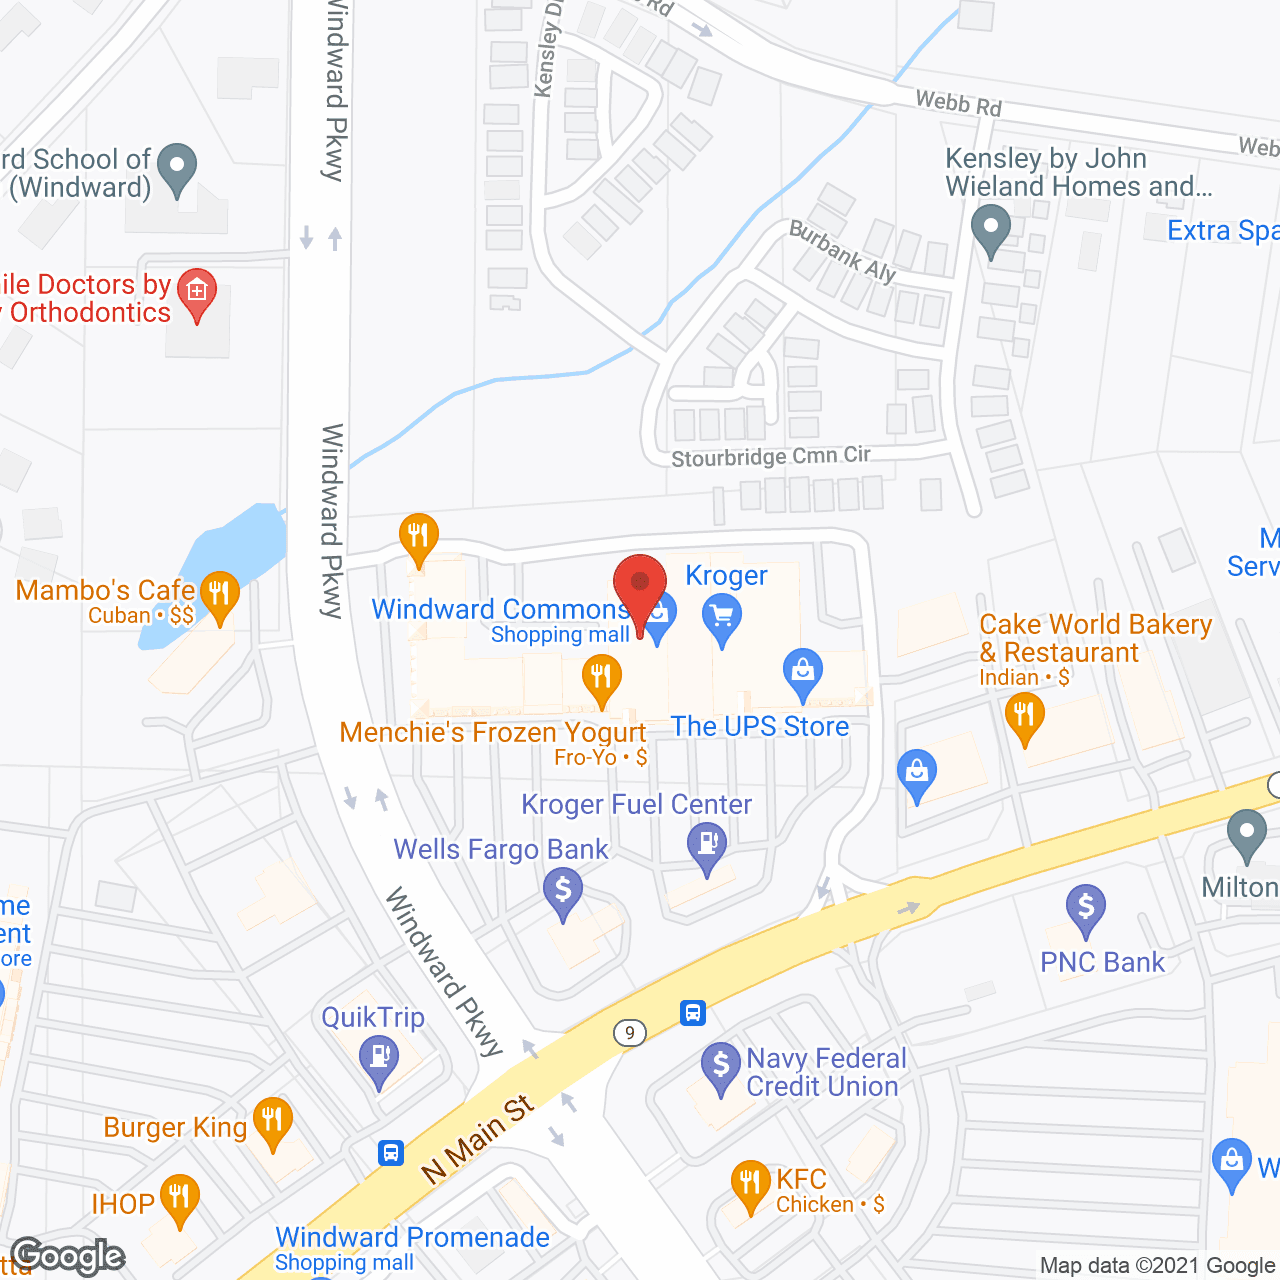 CarePoint Home Care in google map